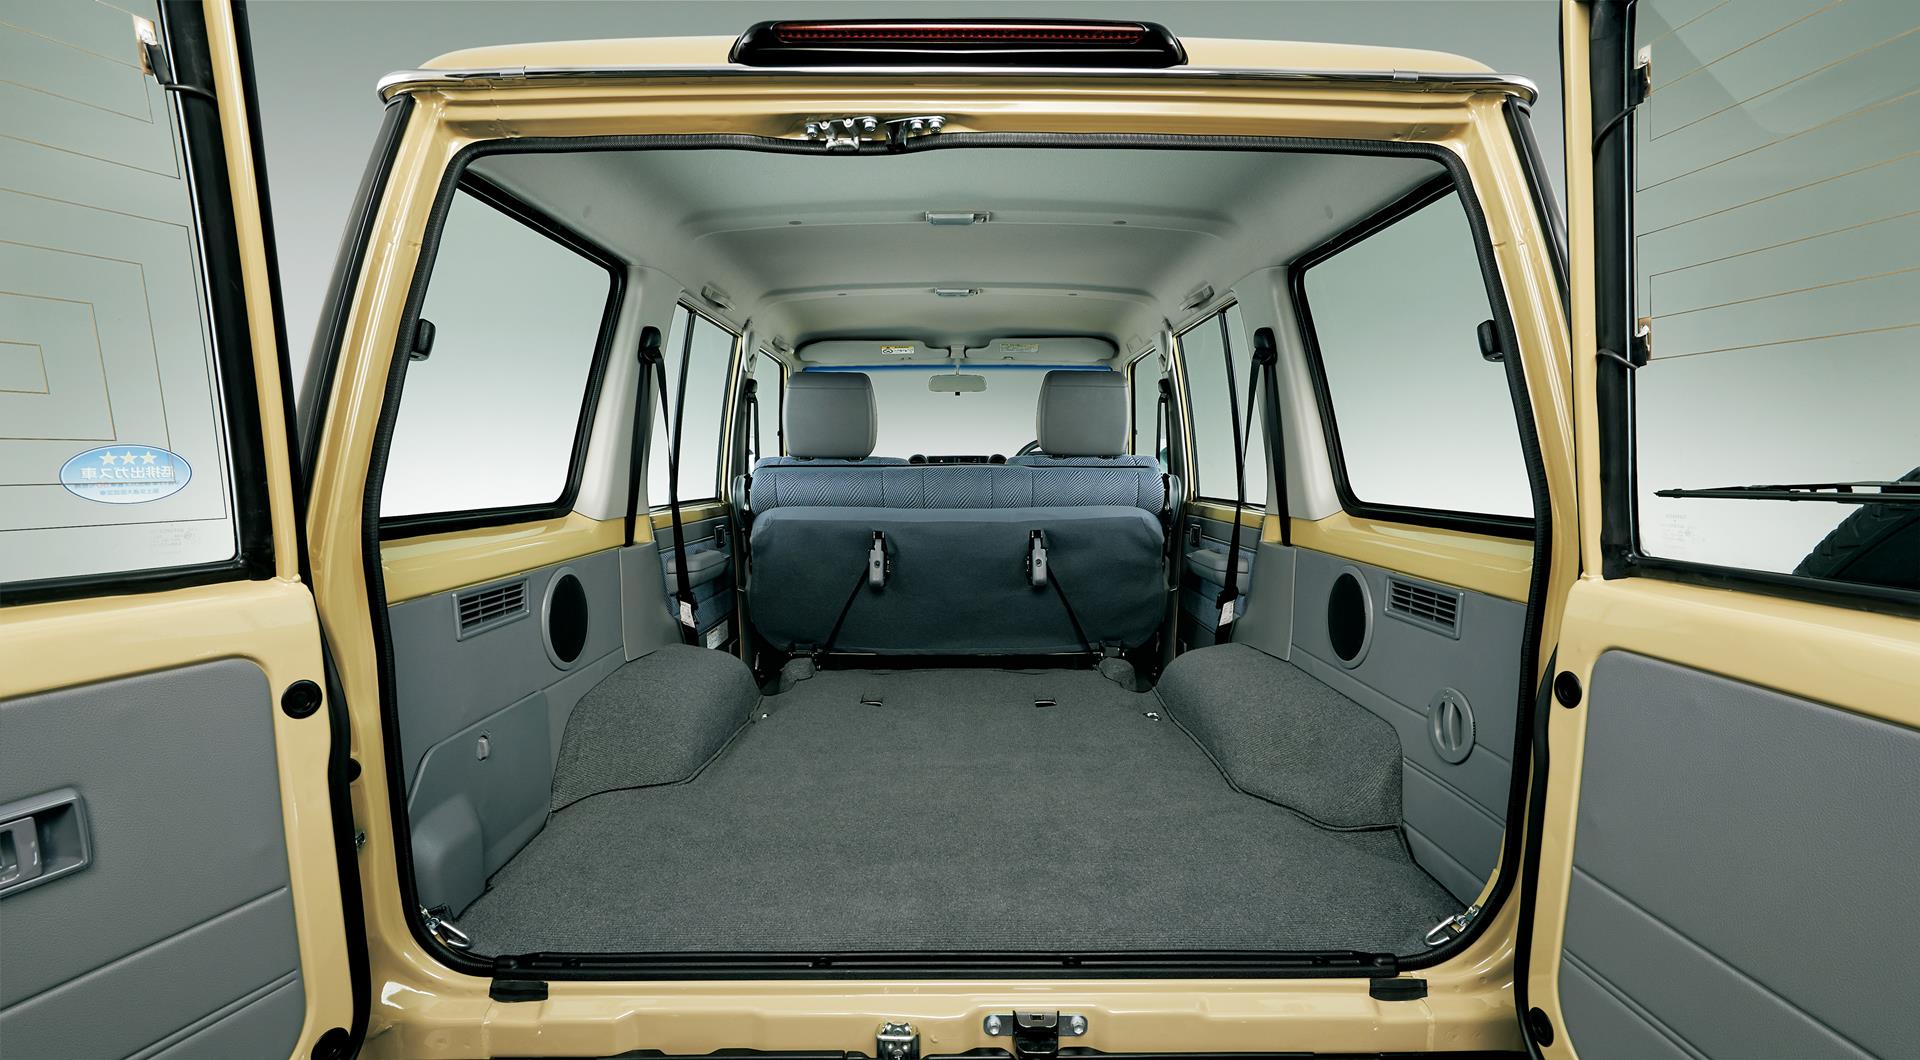 Land Cruiser 70 van cargo space with rear bench seats in stowed position (Japan commemorative re-release)